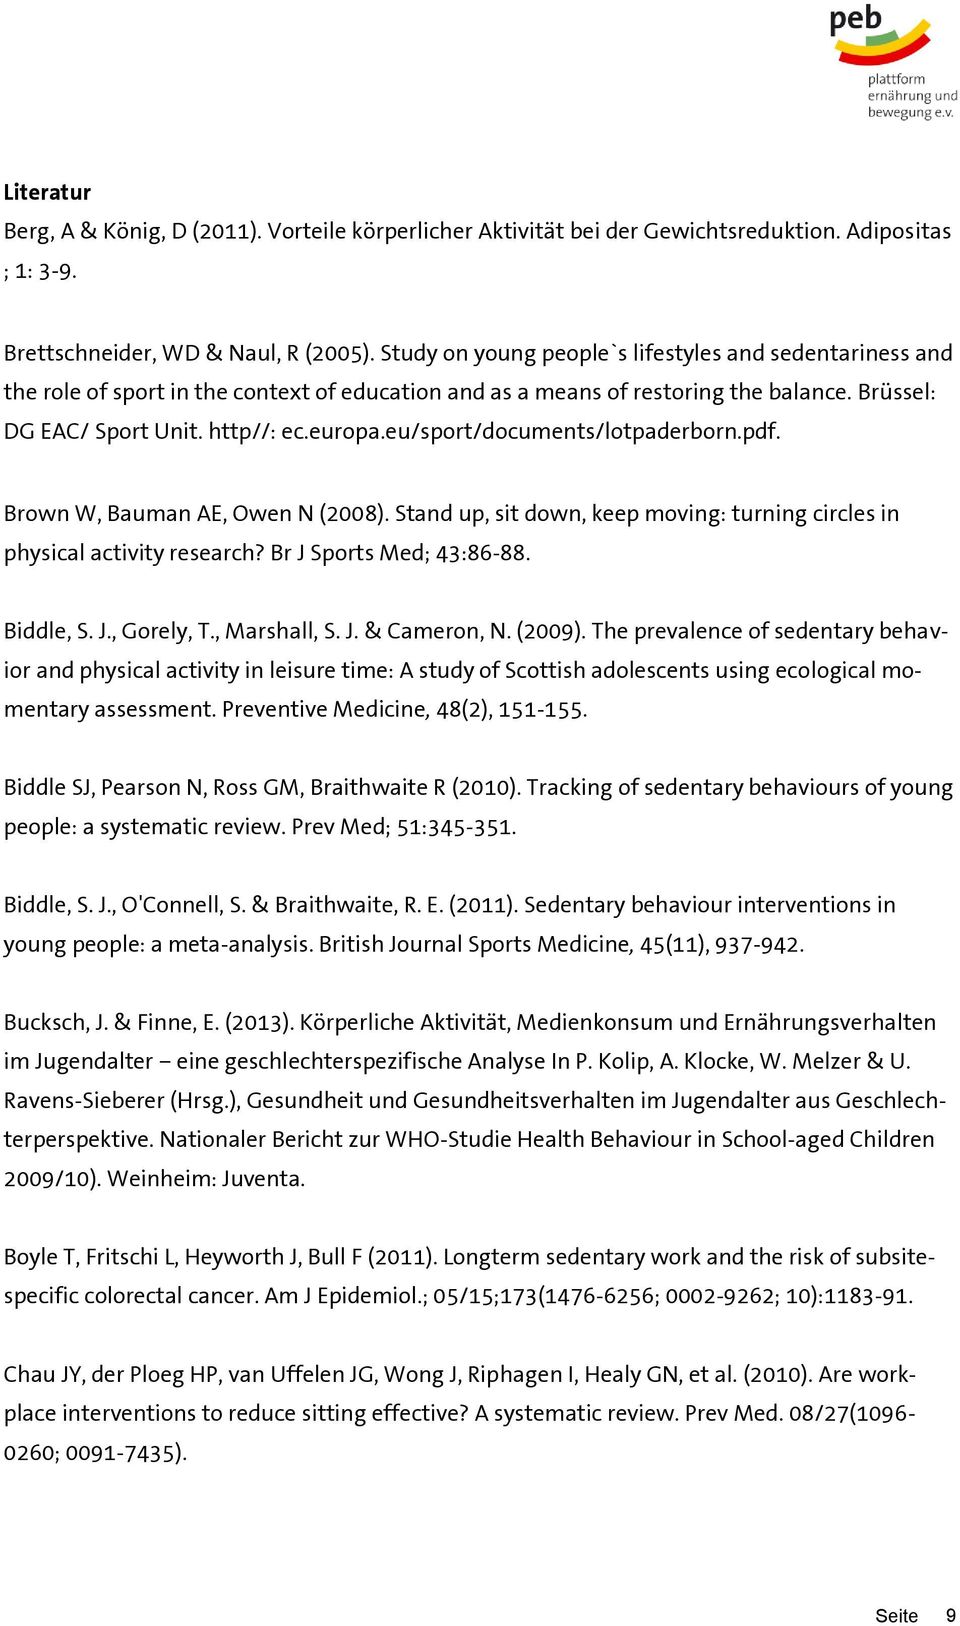 eu/sport/documents/lotpaderborn.pdf. Brown W, Bauman AE, Owen N (2008). Stand up, sit down, keep moving: turning circles in physical activity research? Br J Sports Med; 43:86-88. Biddle, S. J., Gorely, T.